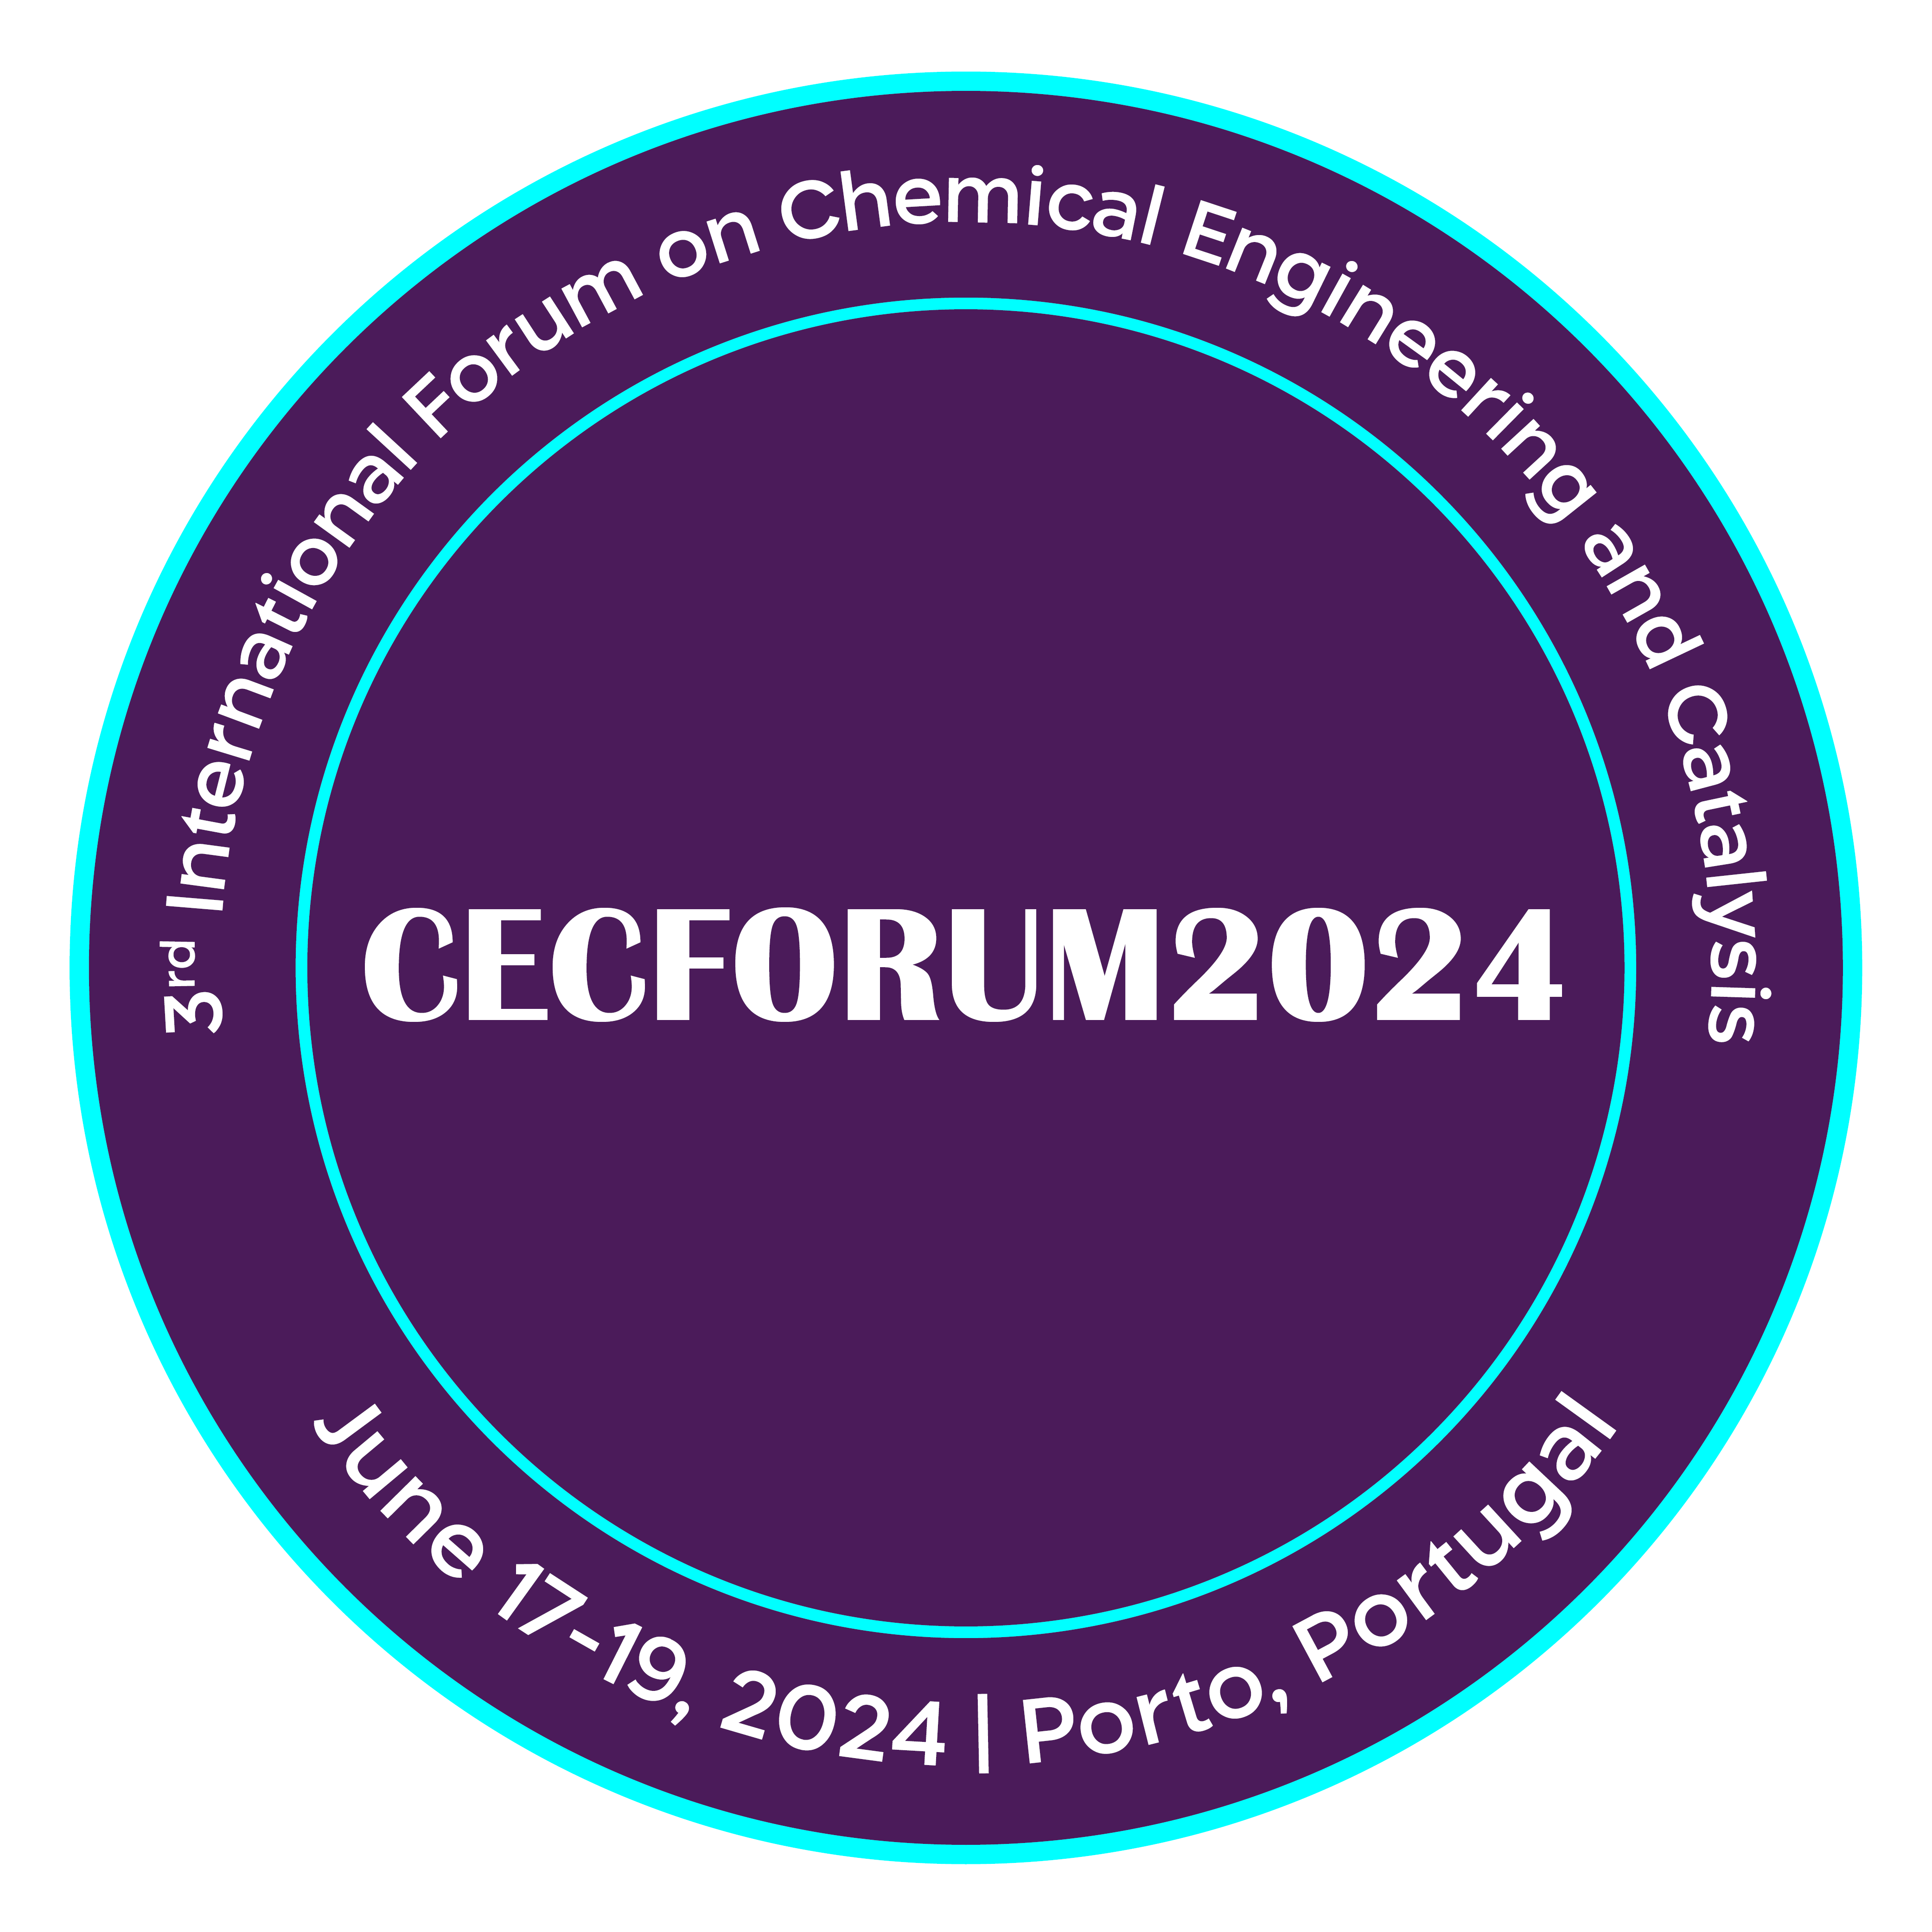 3rd International Forum on Chemical Engineering and Catalysis